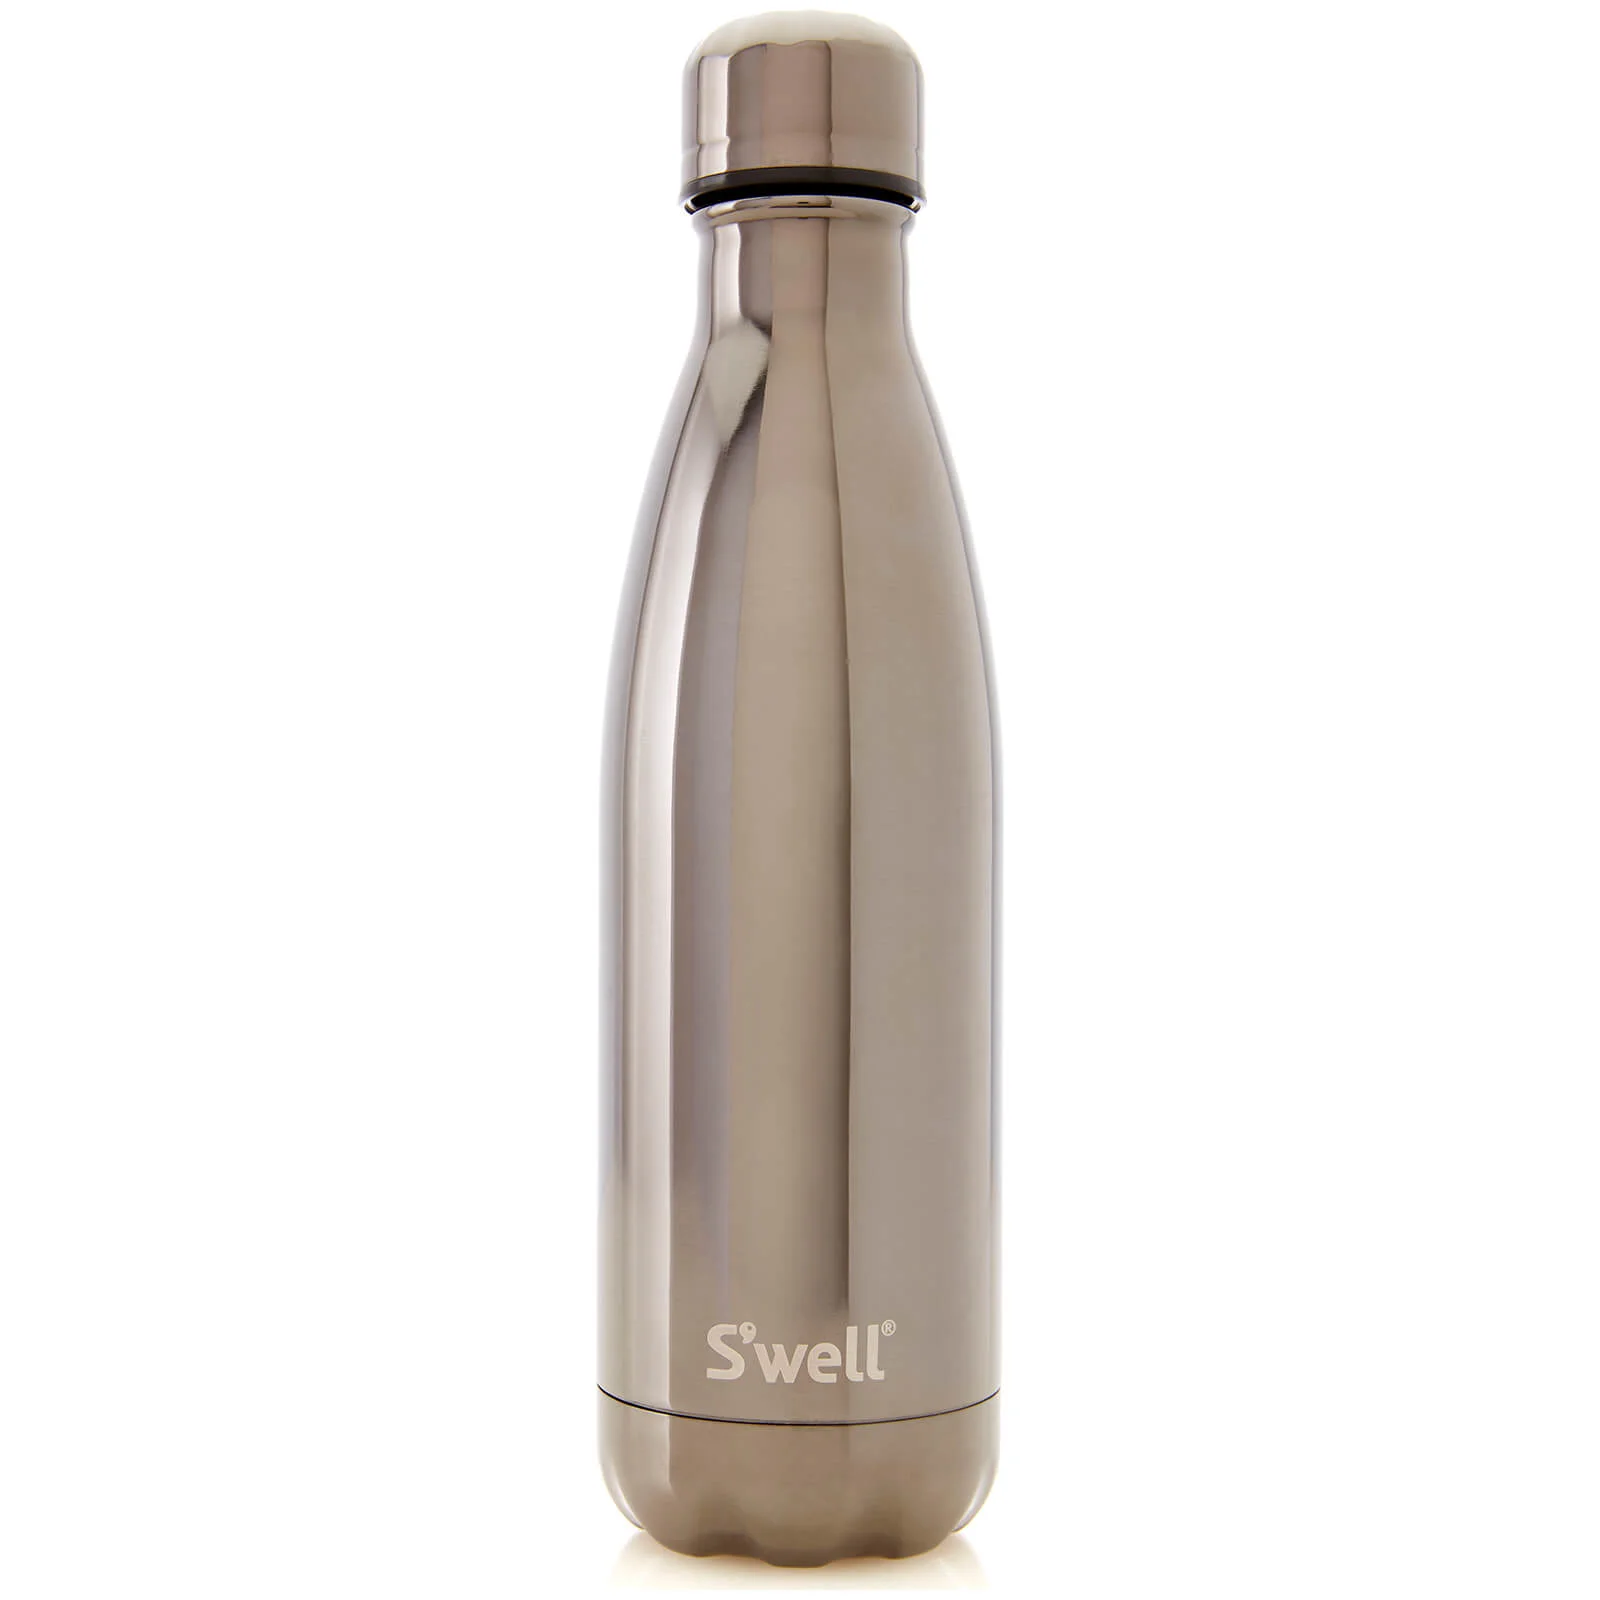 S'well The Titanium Water Bottle 500ml Image 1